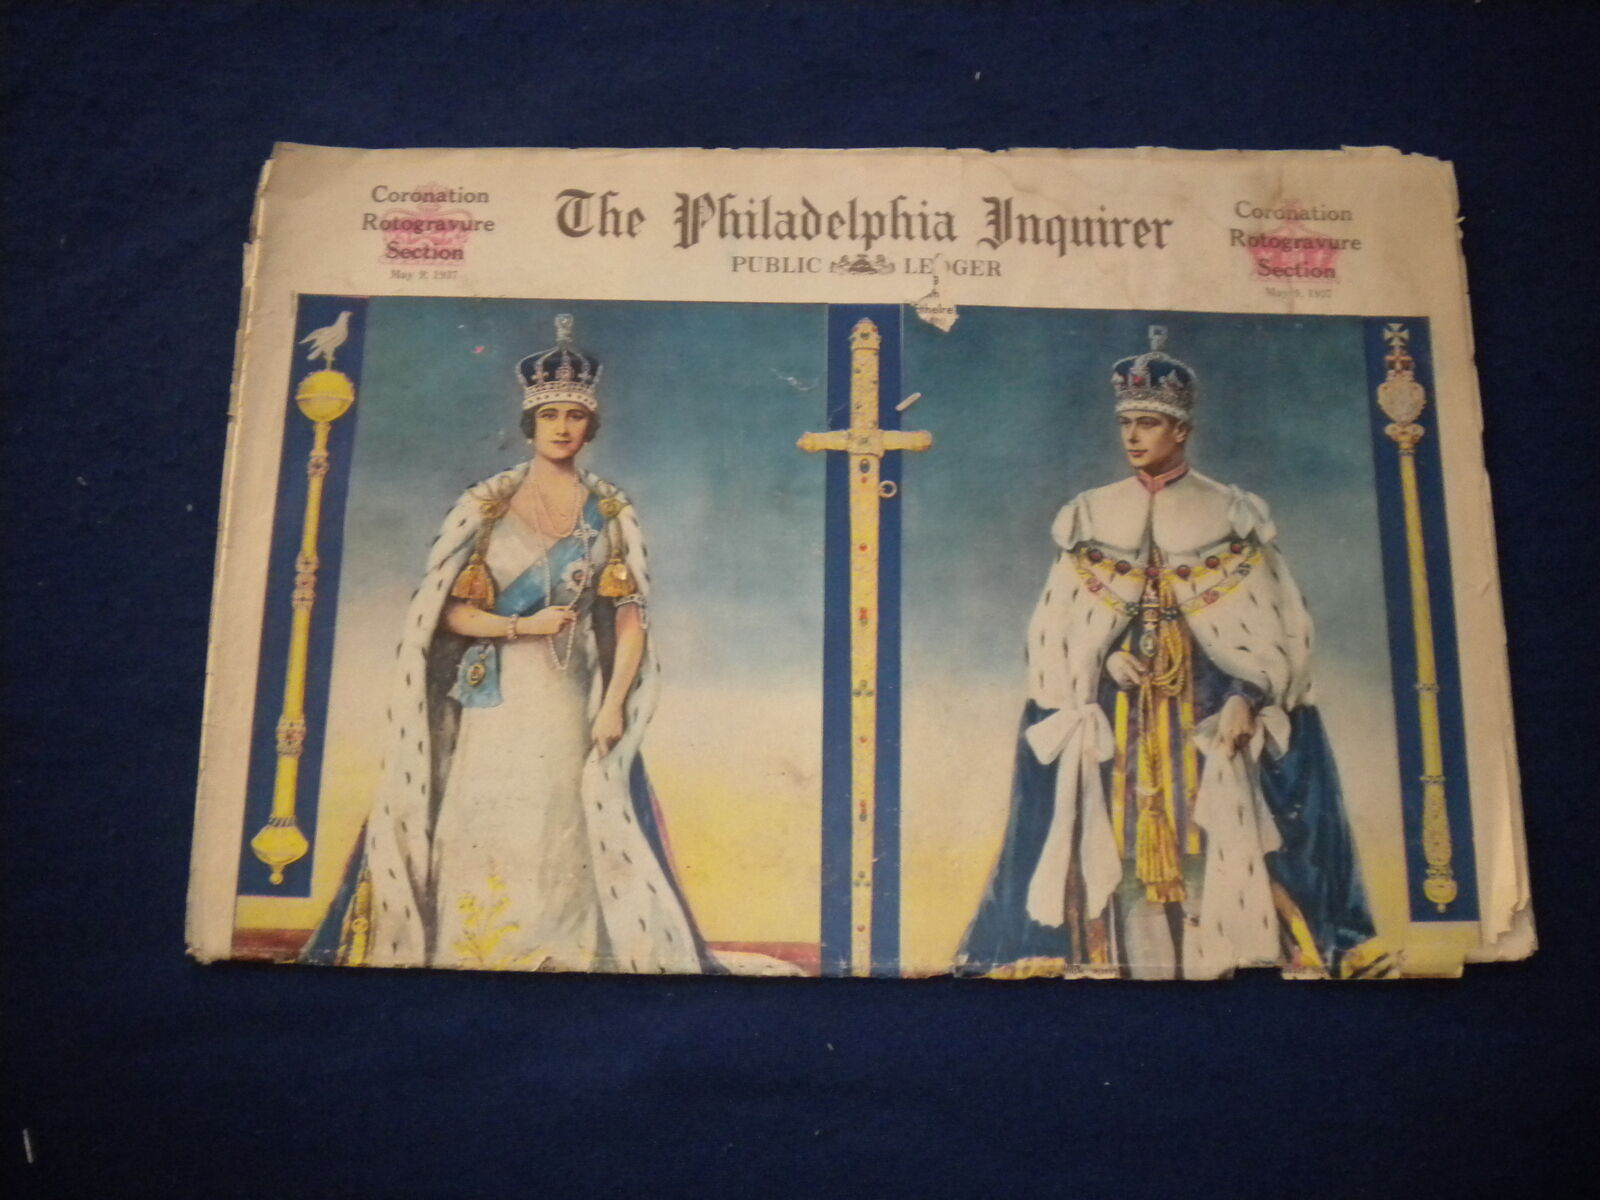 1937 MAY 9 THE PHILADELPHIA INQUIRER ROTOGRAVURE SECTION - CORONATION - NP 6026